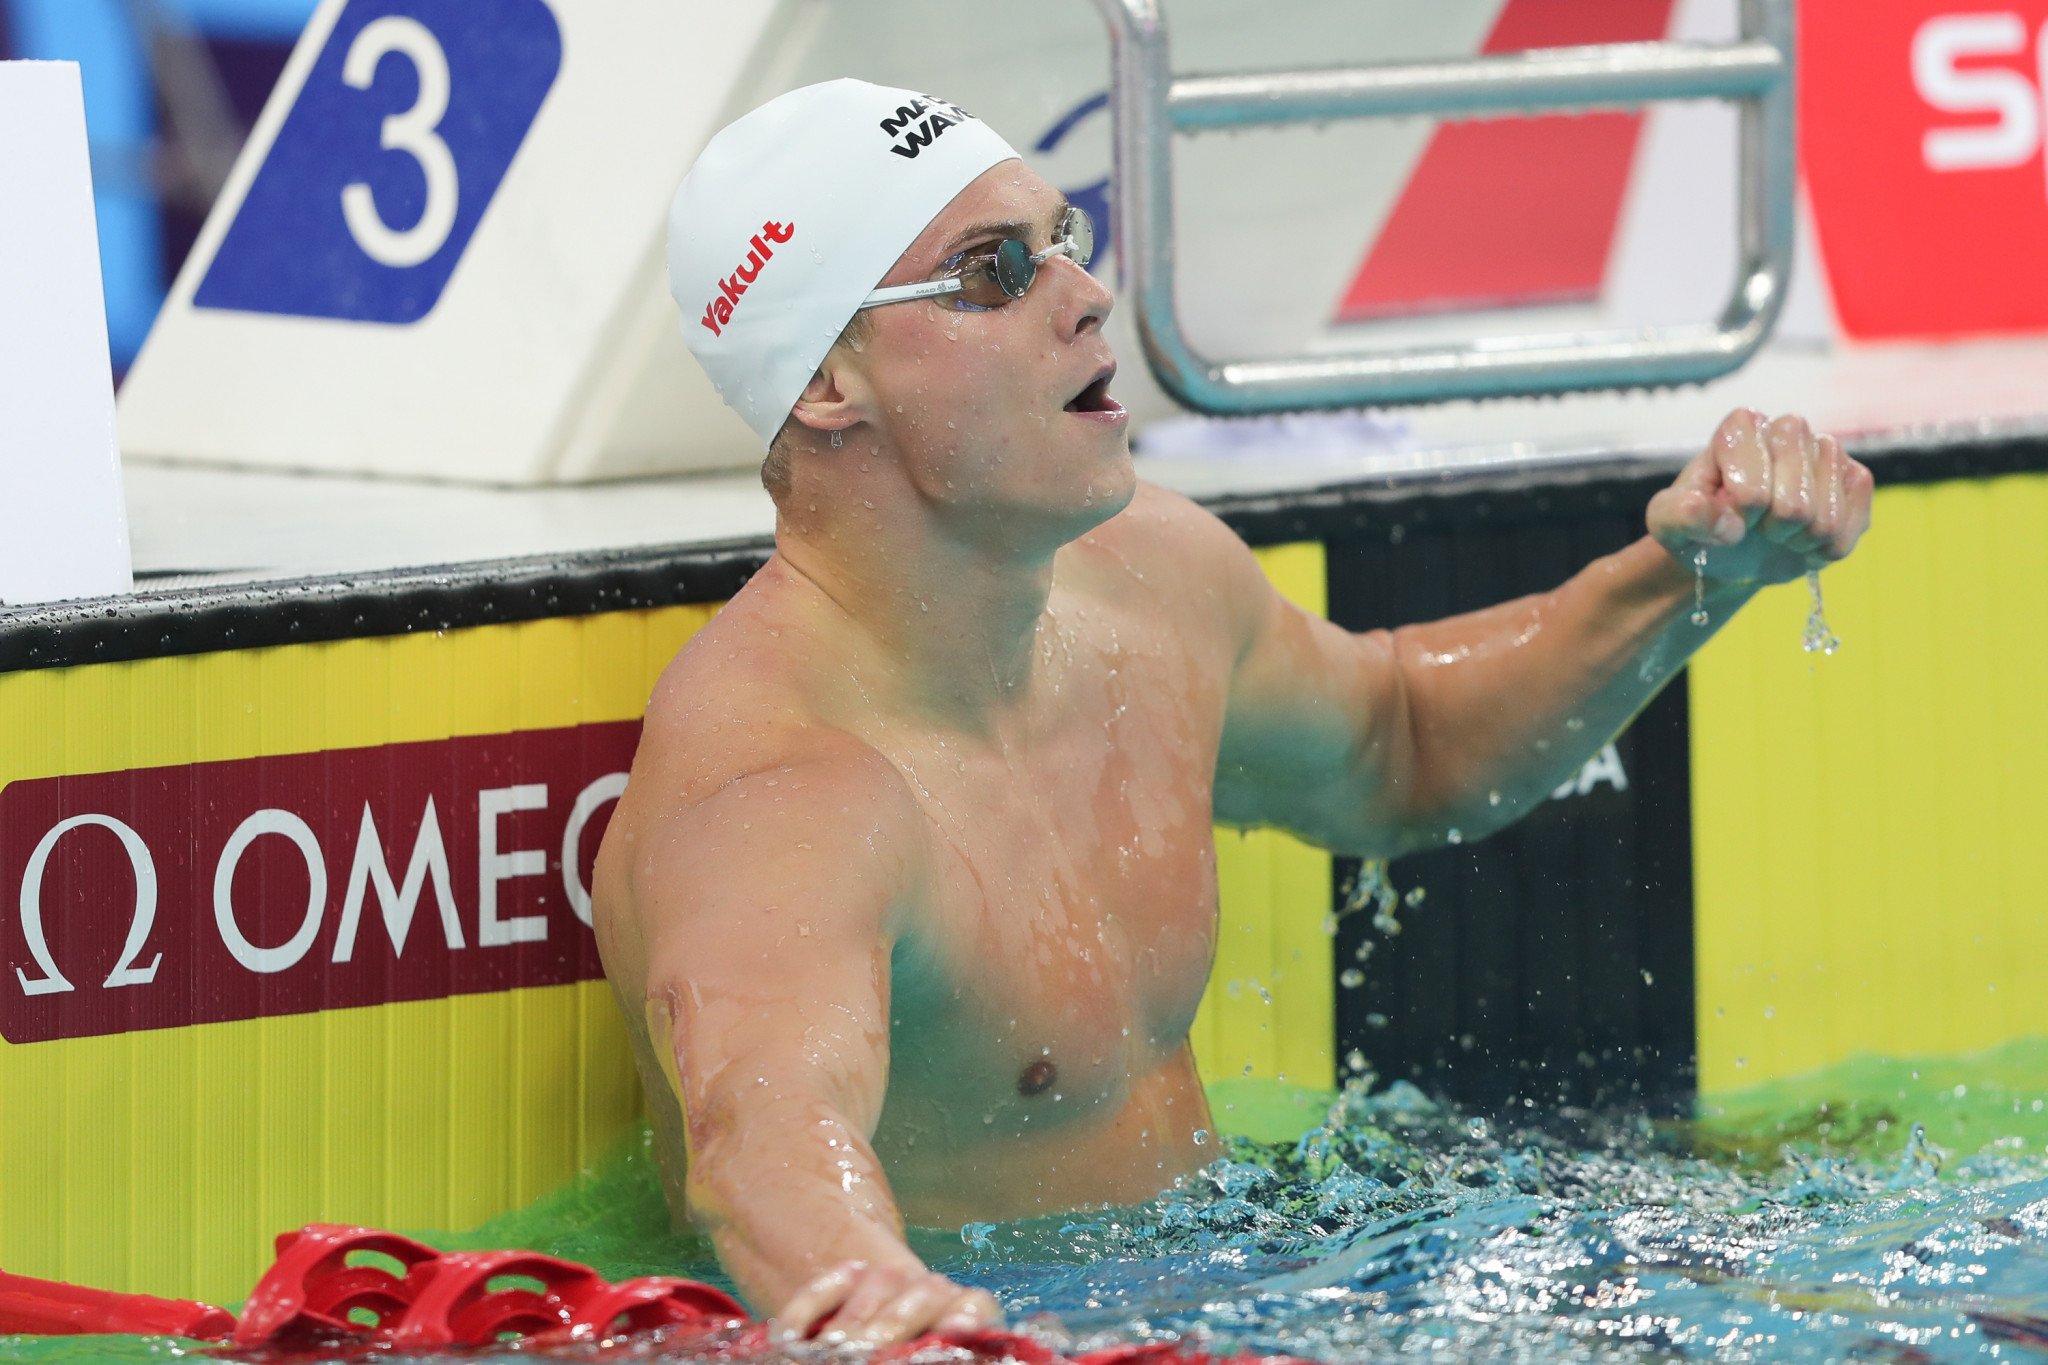 Russian Vladimir Morozov recorded two victories on day one in Beijing ©Getty Images